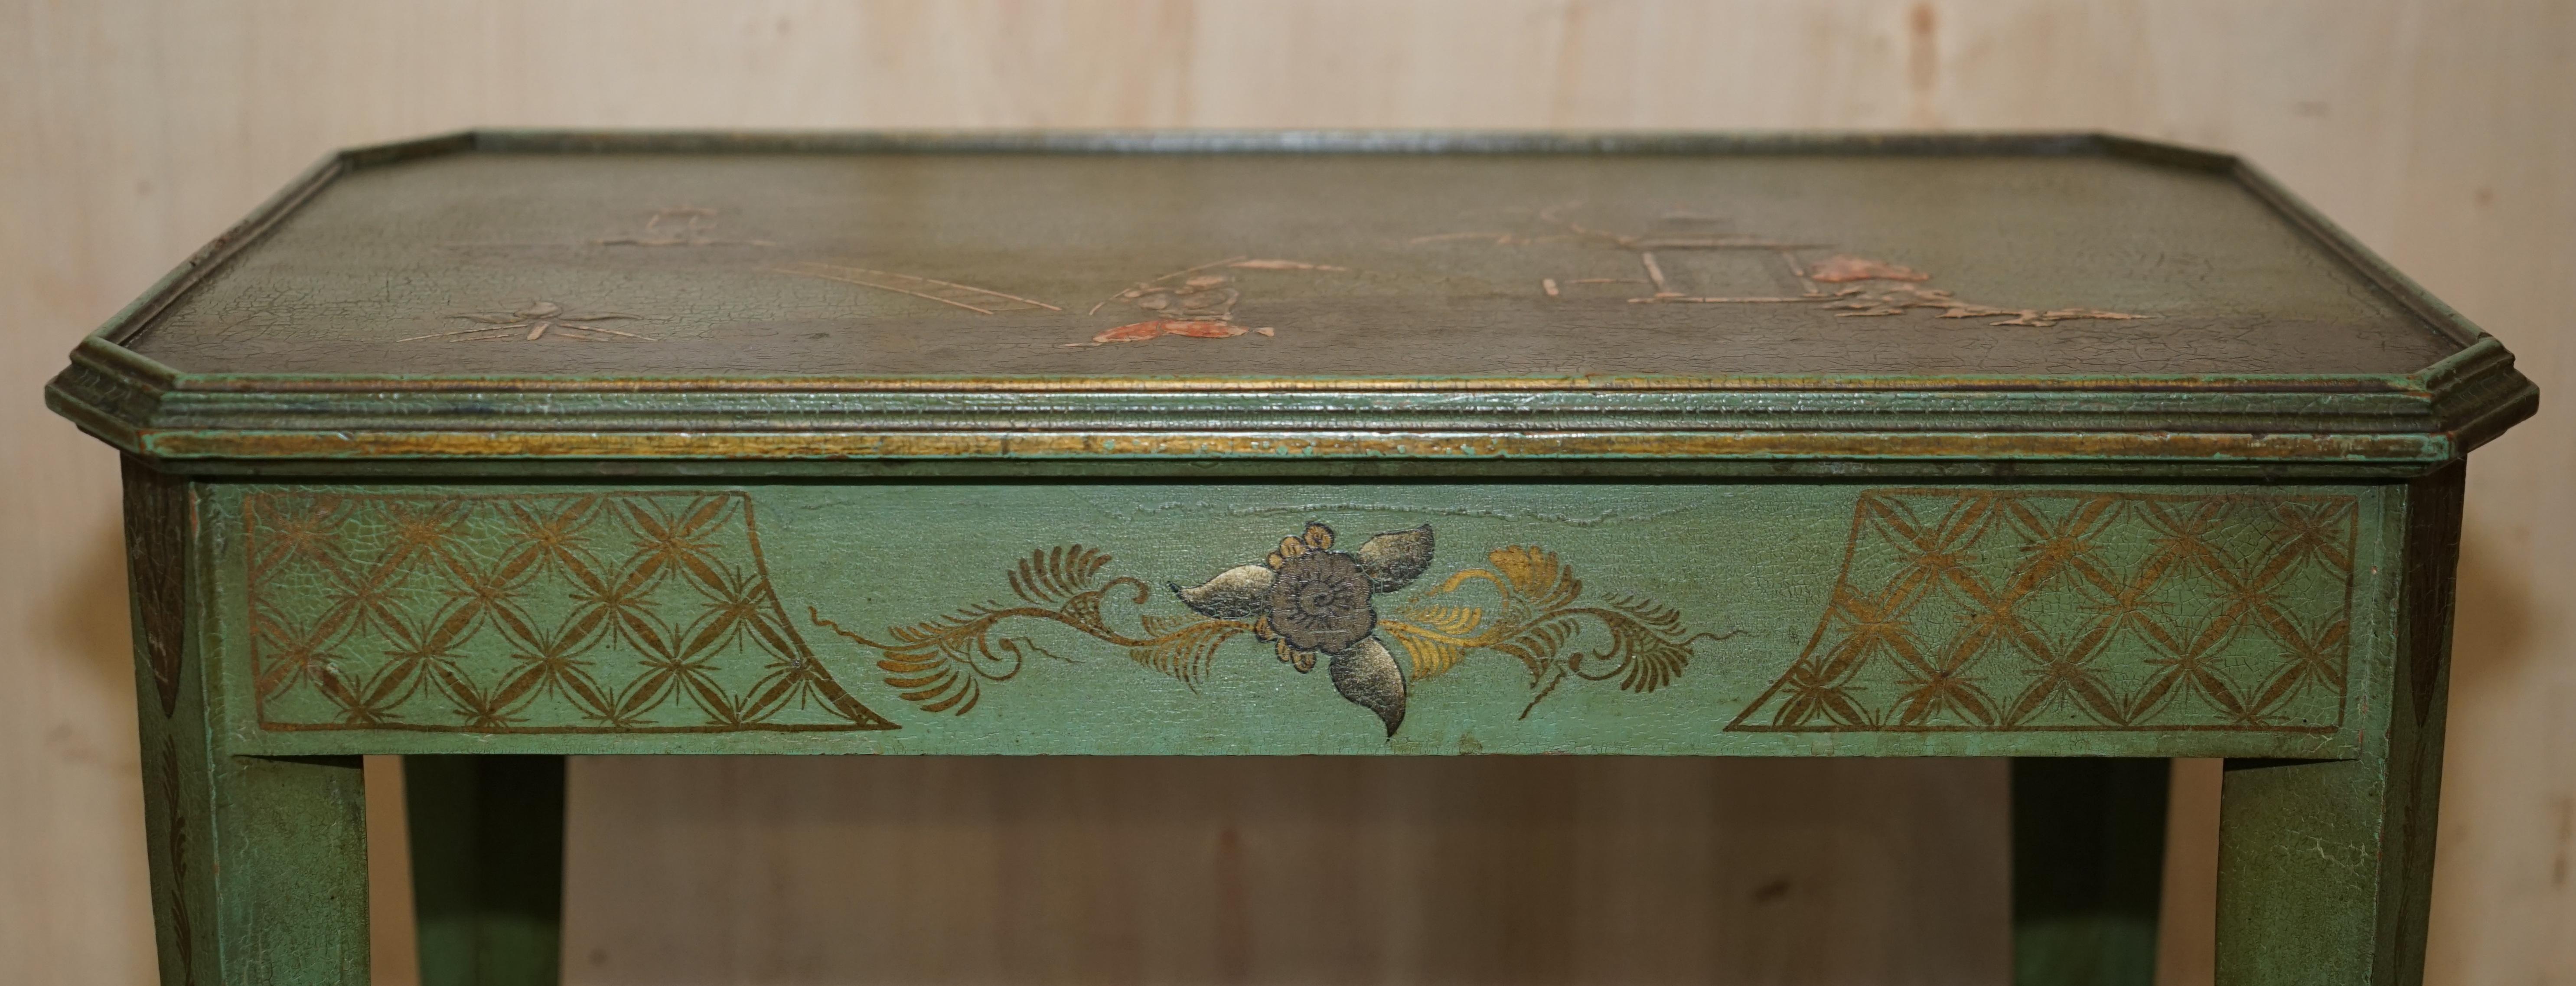 painted victorian furniture